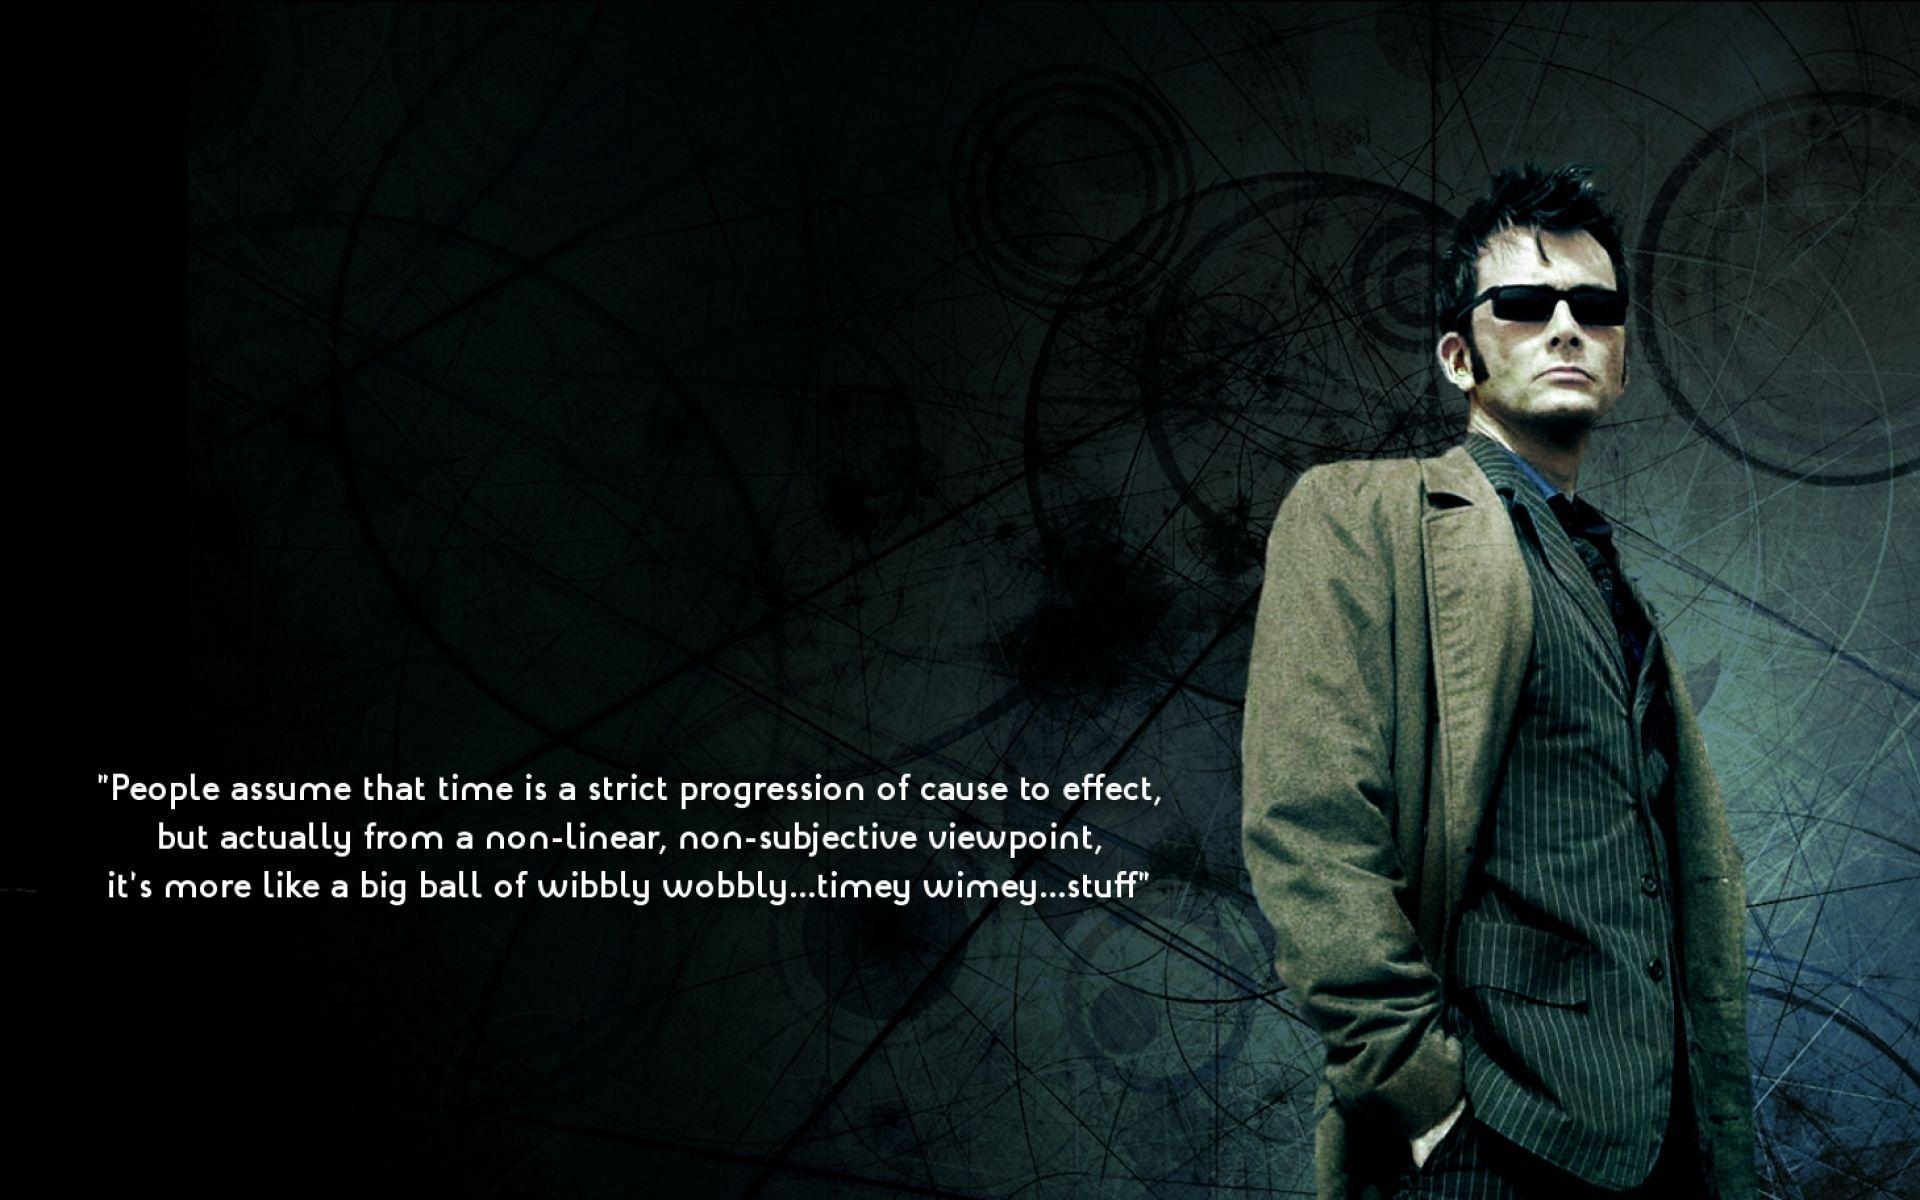 Dr Who David Tennant. quotes david tennant doctor who tenth doctor